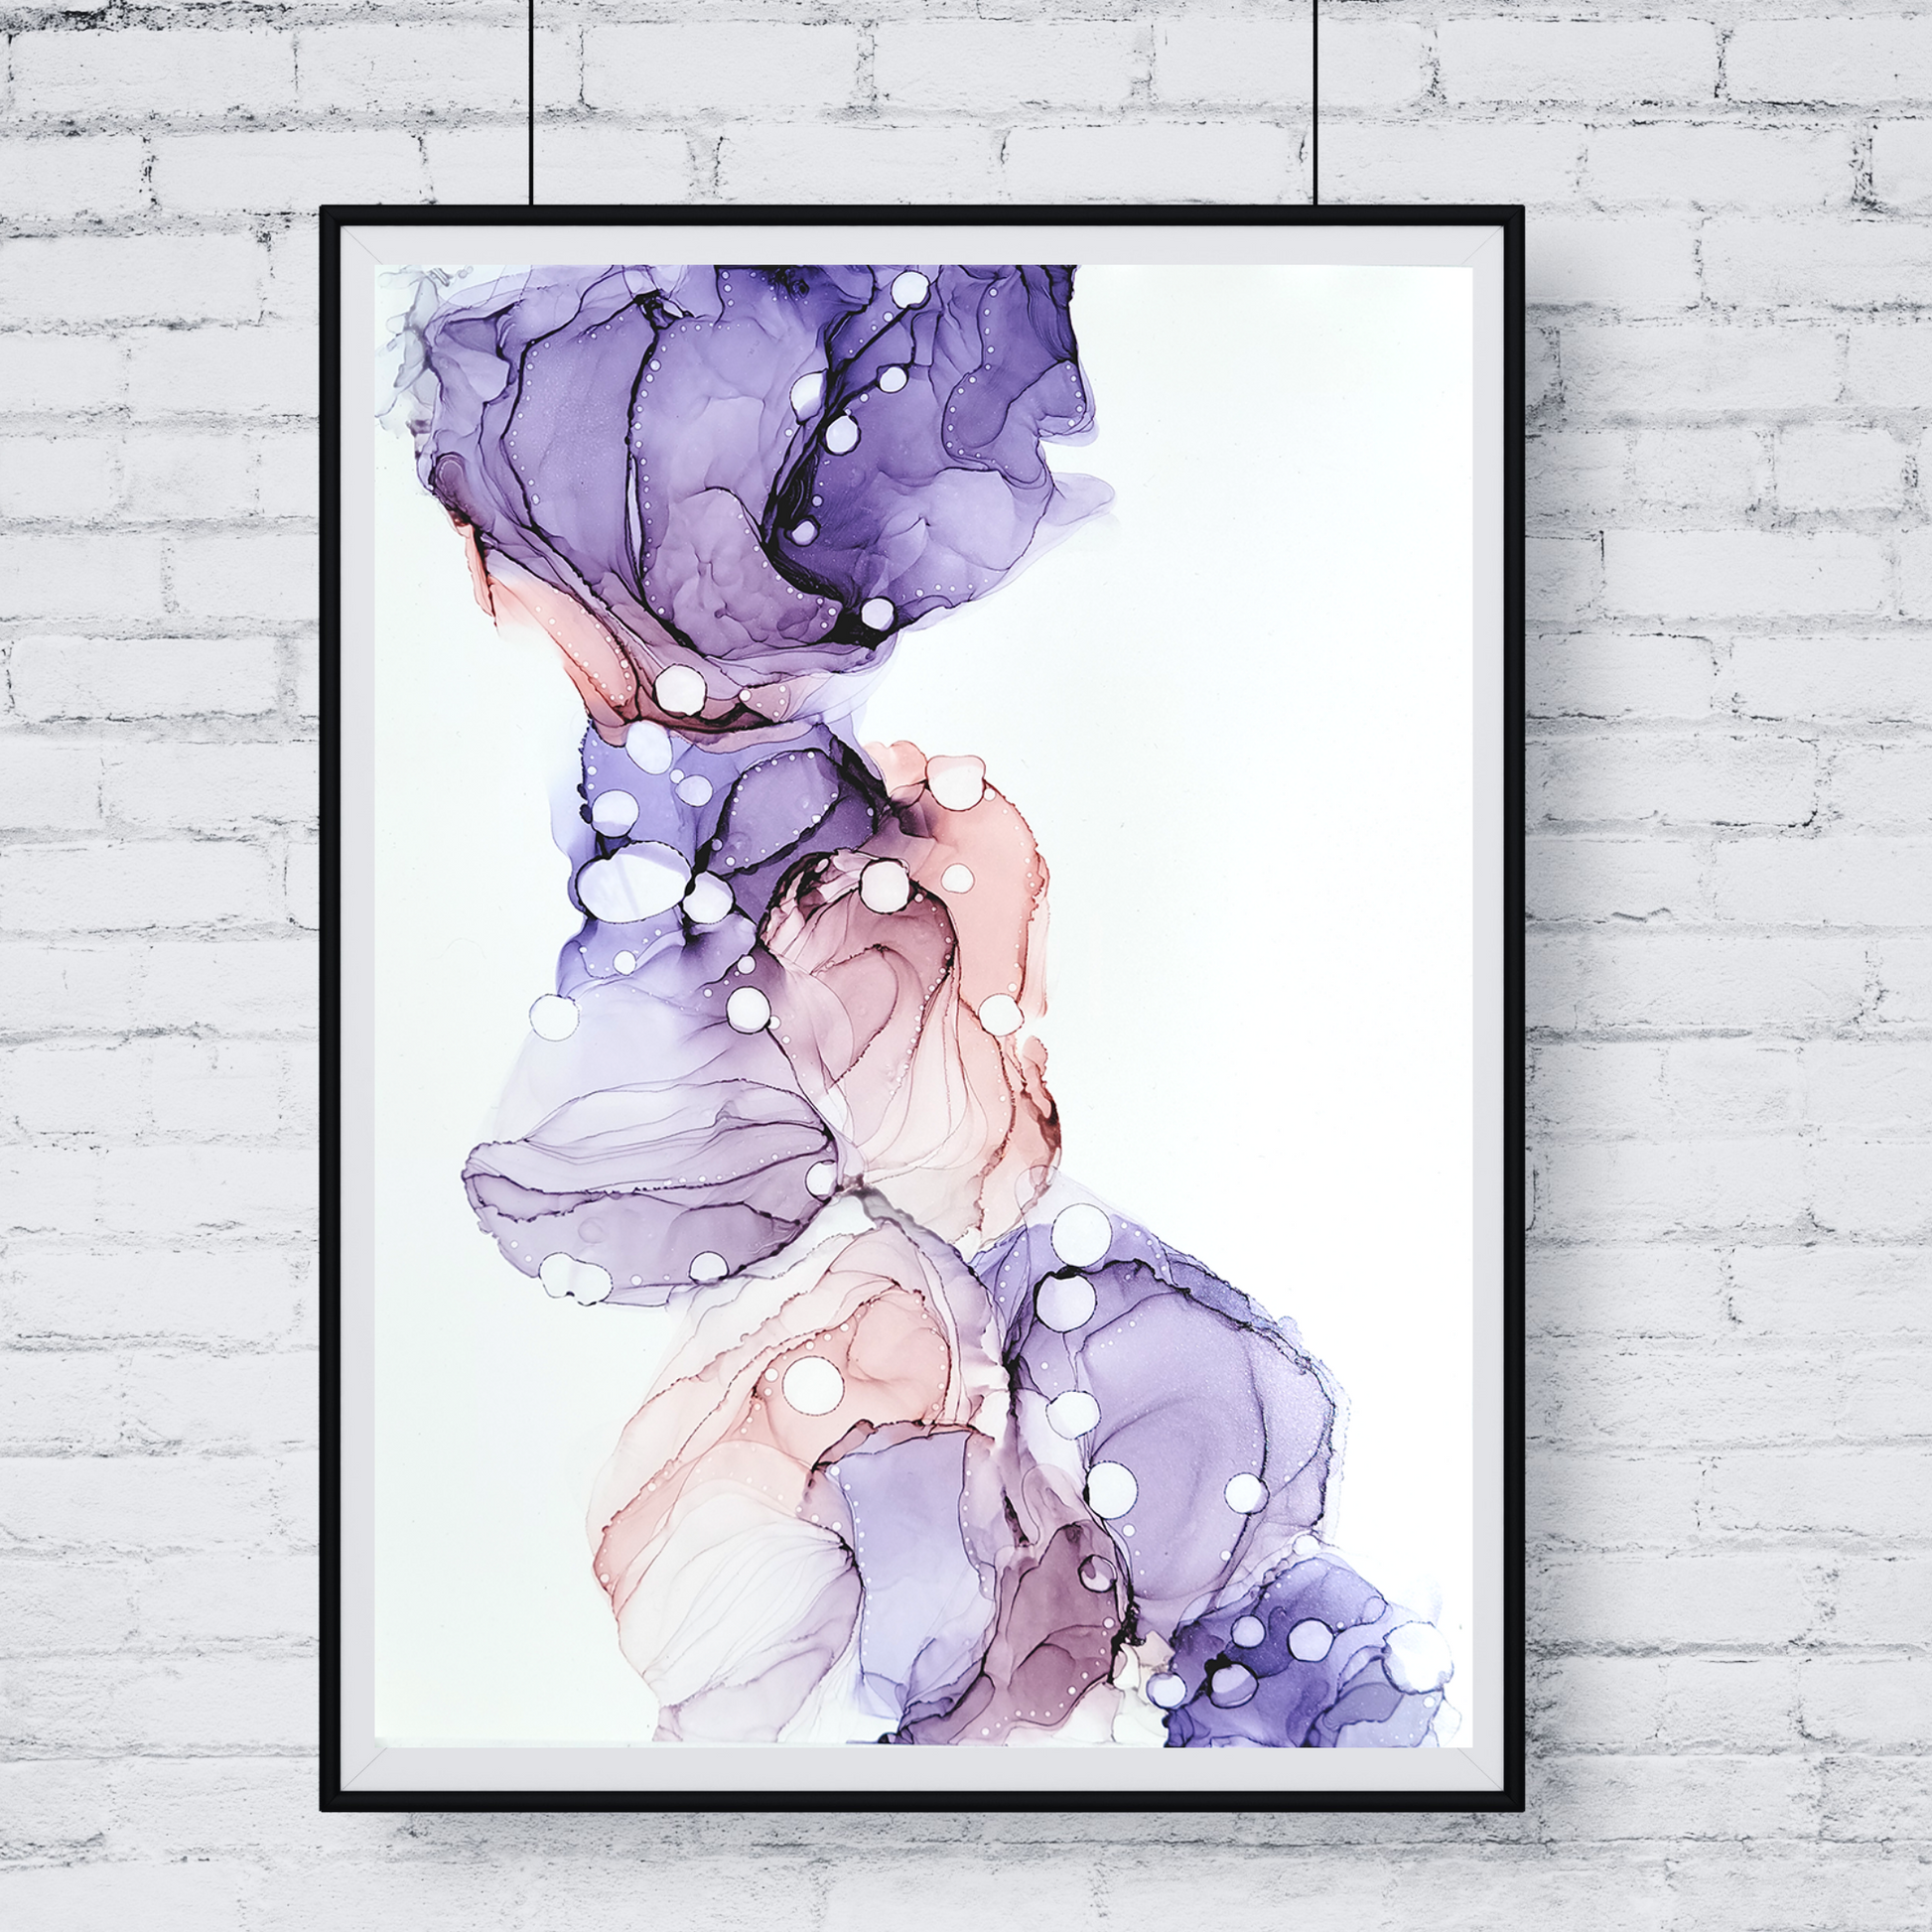 Original Alcohol Ink Abstract Painting | Violet Clouds | 9x12